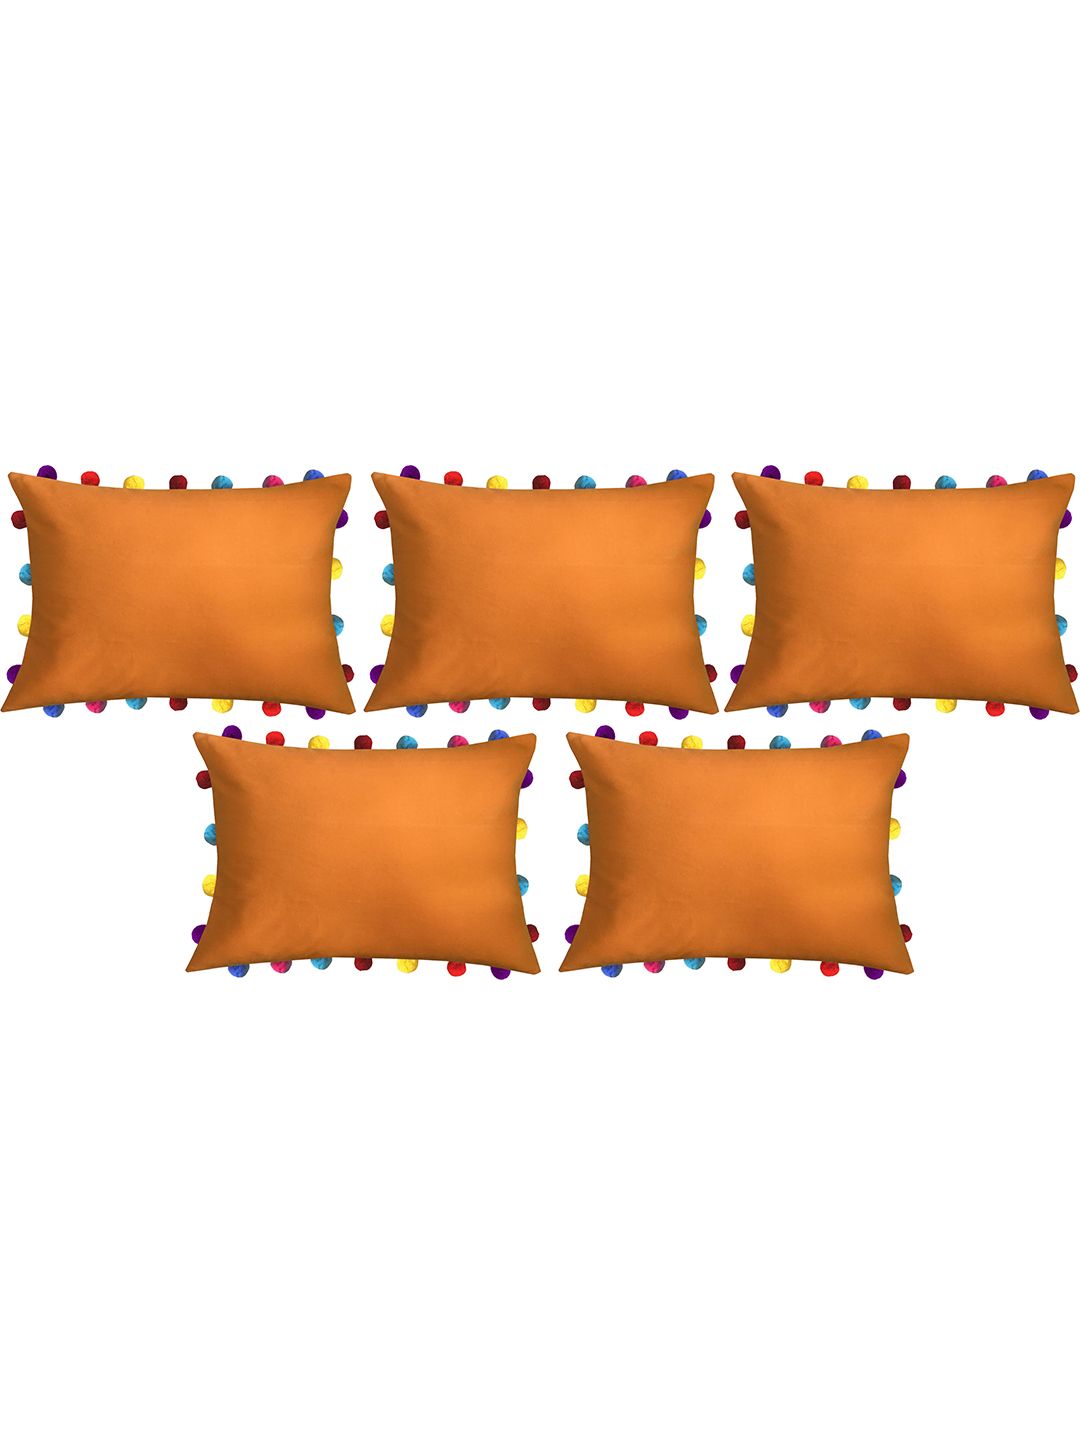 Lushomes Orange Set of 5 Rectangle Cushion Covers Price in India